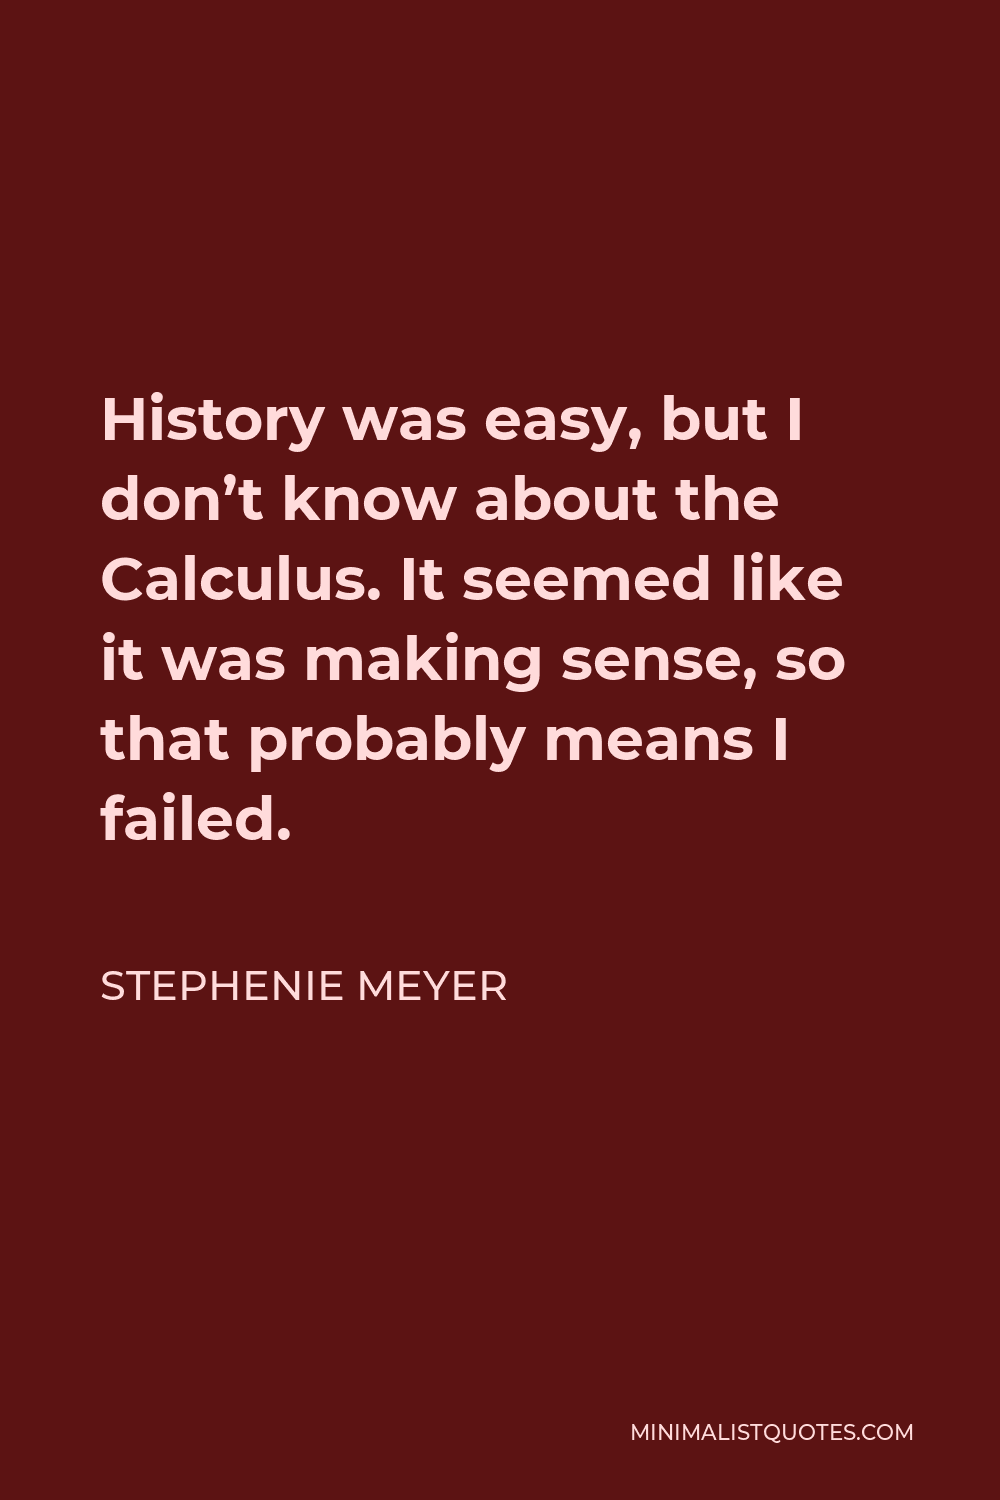 Stephenie Meyer Quote - History was easy, but I don’t know about the Calculus. It seemed like it was making sense, so that probably means I failed.